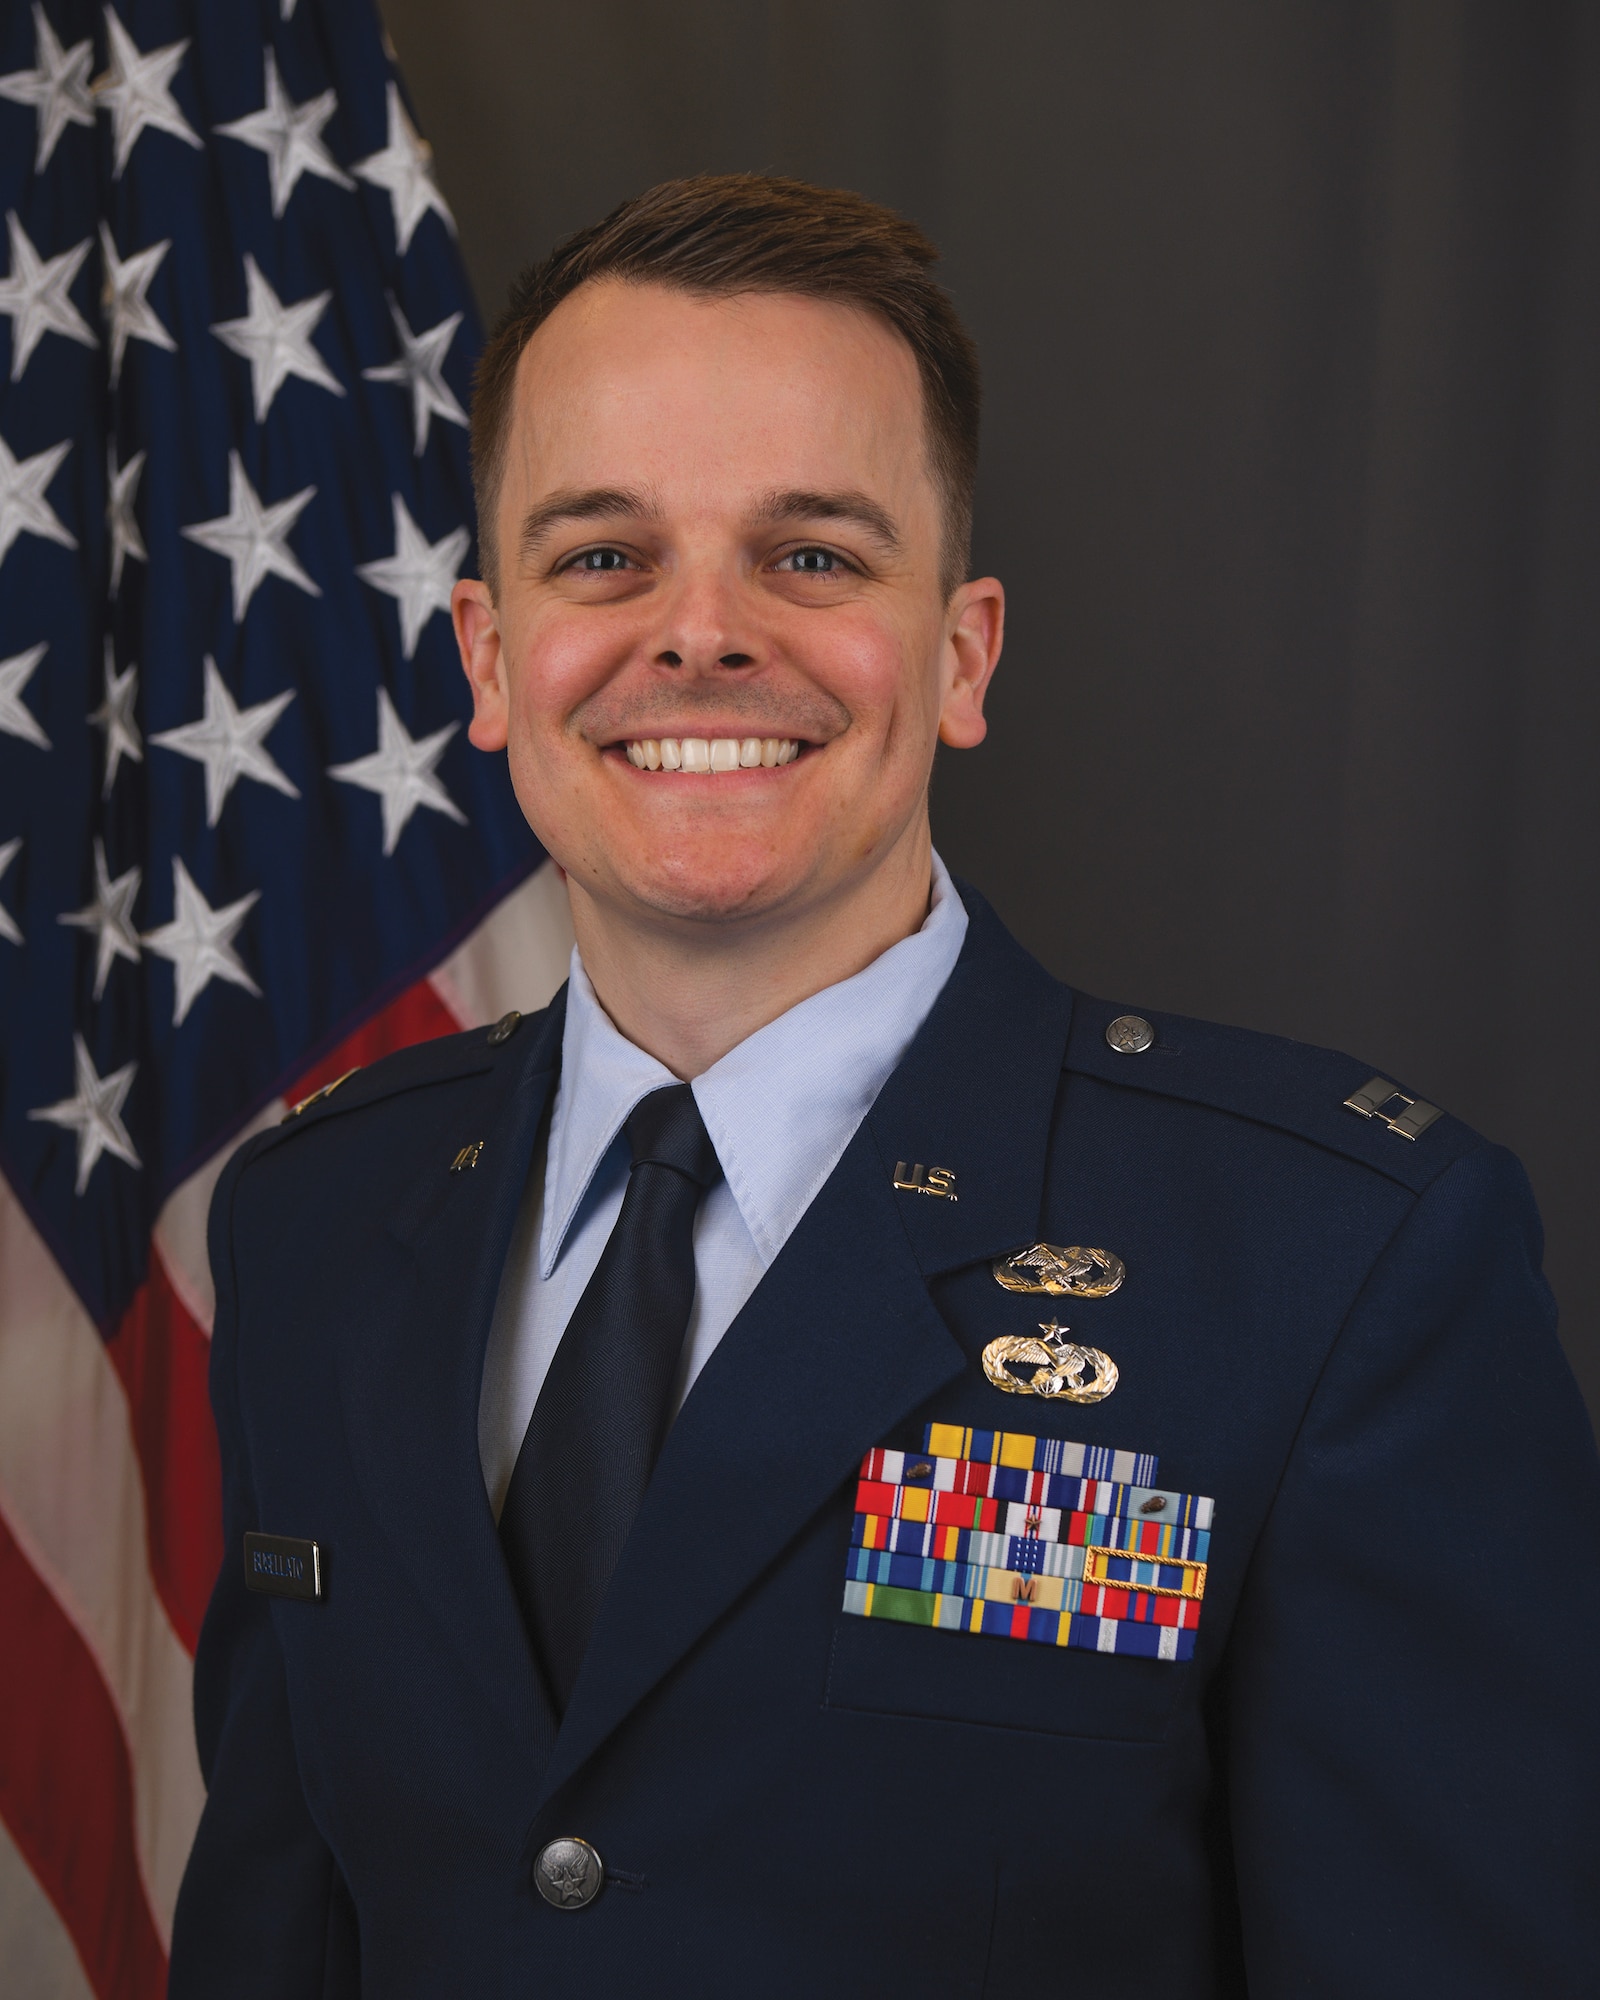 Capt. Anthony Busellato, 445th Logistics Readiness Squadron vehicle maintenance flight commander, is the 445th Airlift Wing Company Grade Officer of the Quarter.